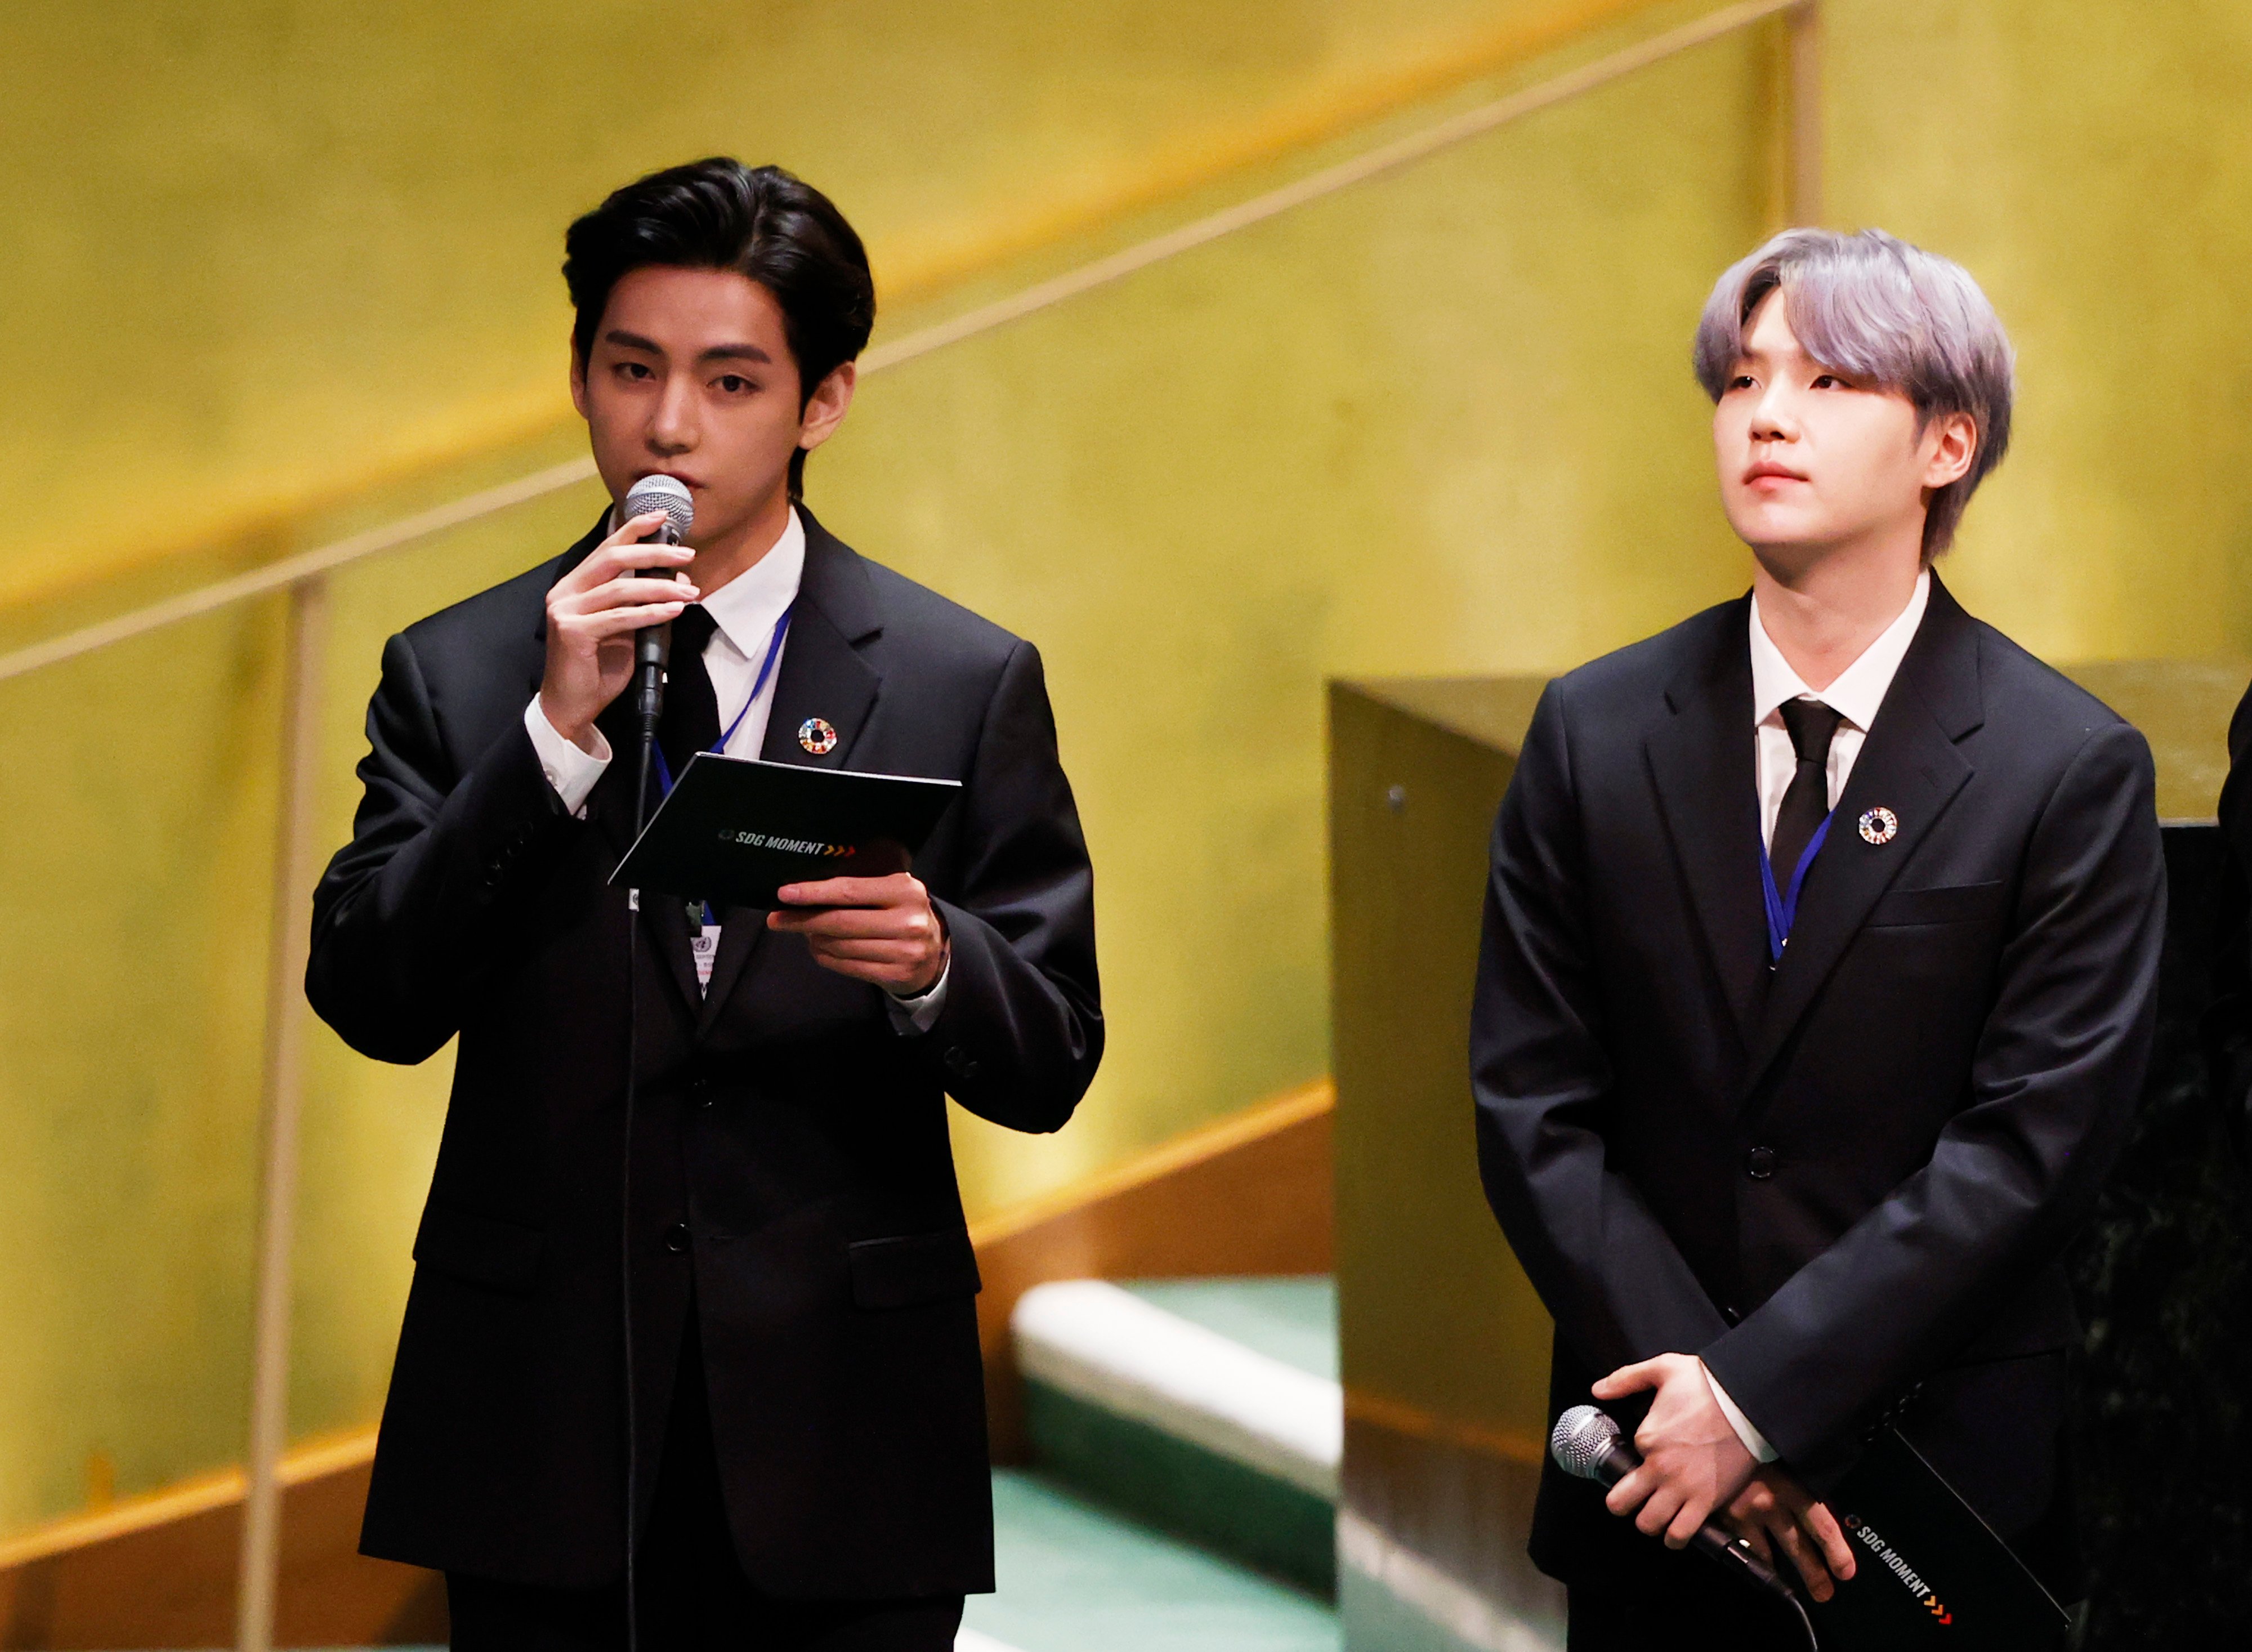 Suga listens as Taehyung/V of BTS speaks at the SDG Moment event as part of the UN General Assembly 76th session General Debate